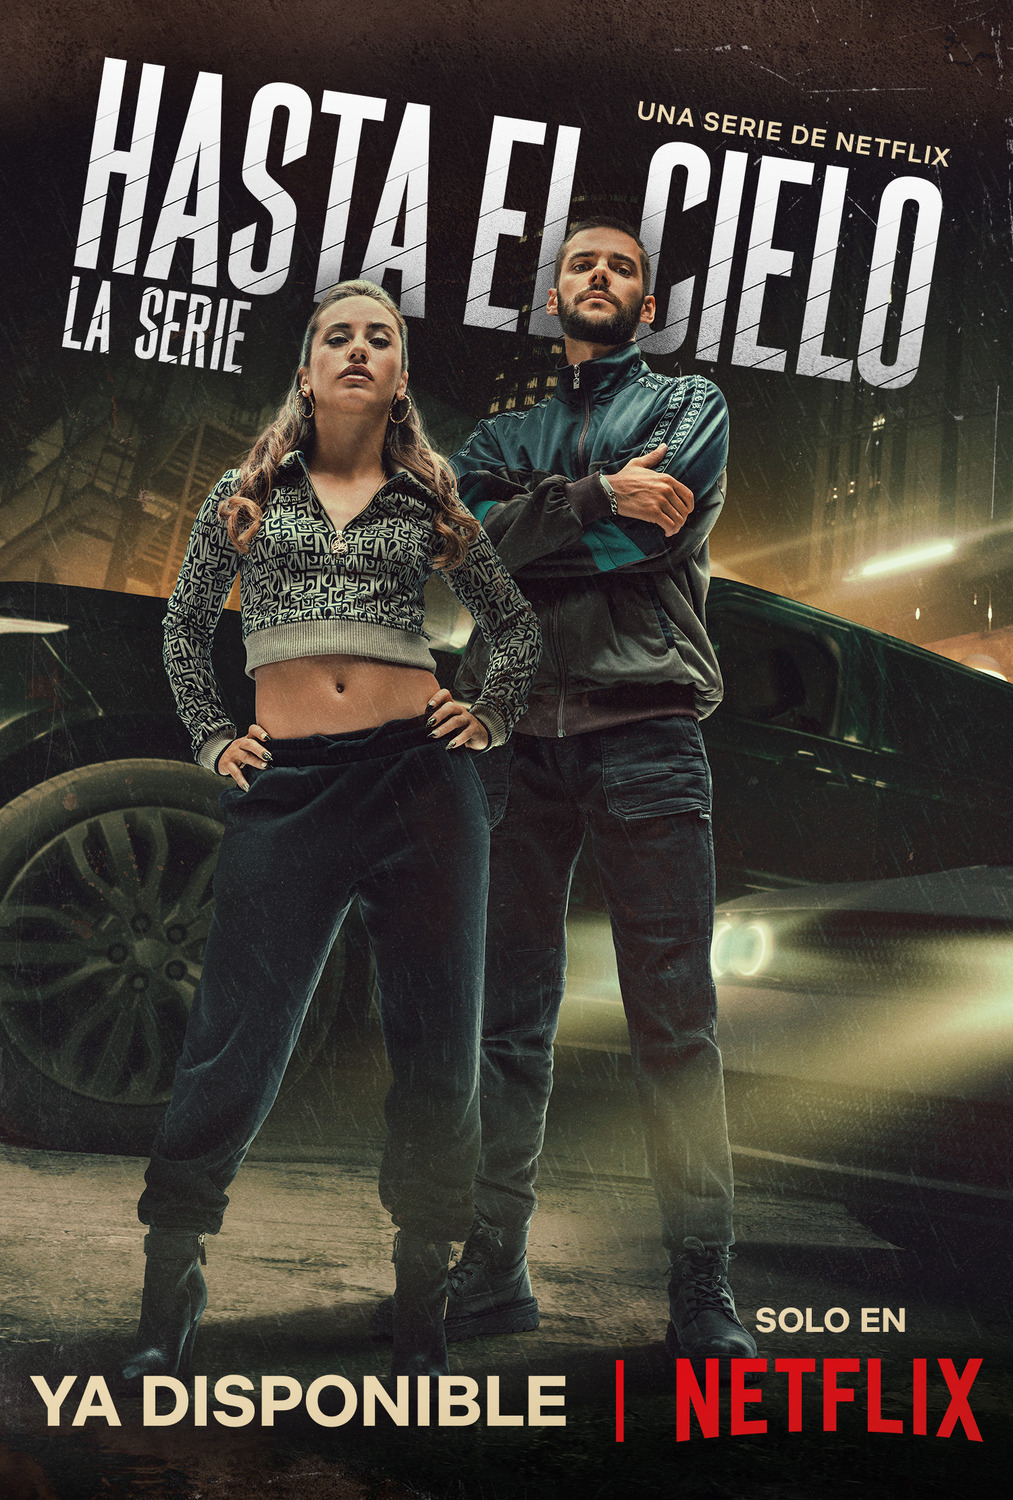 Extra Large TV Poster Image for Hasta el cielo: La serie (#3 of 7)